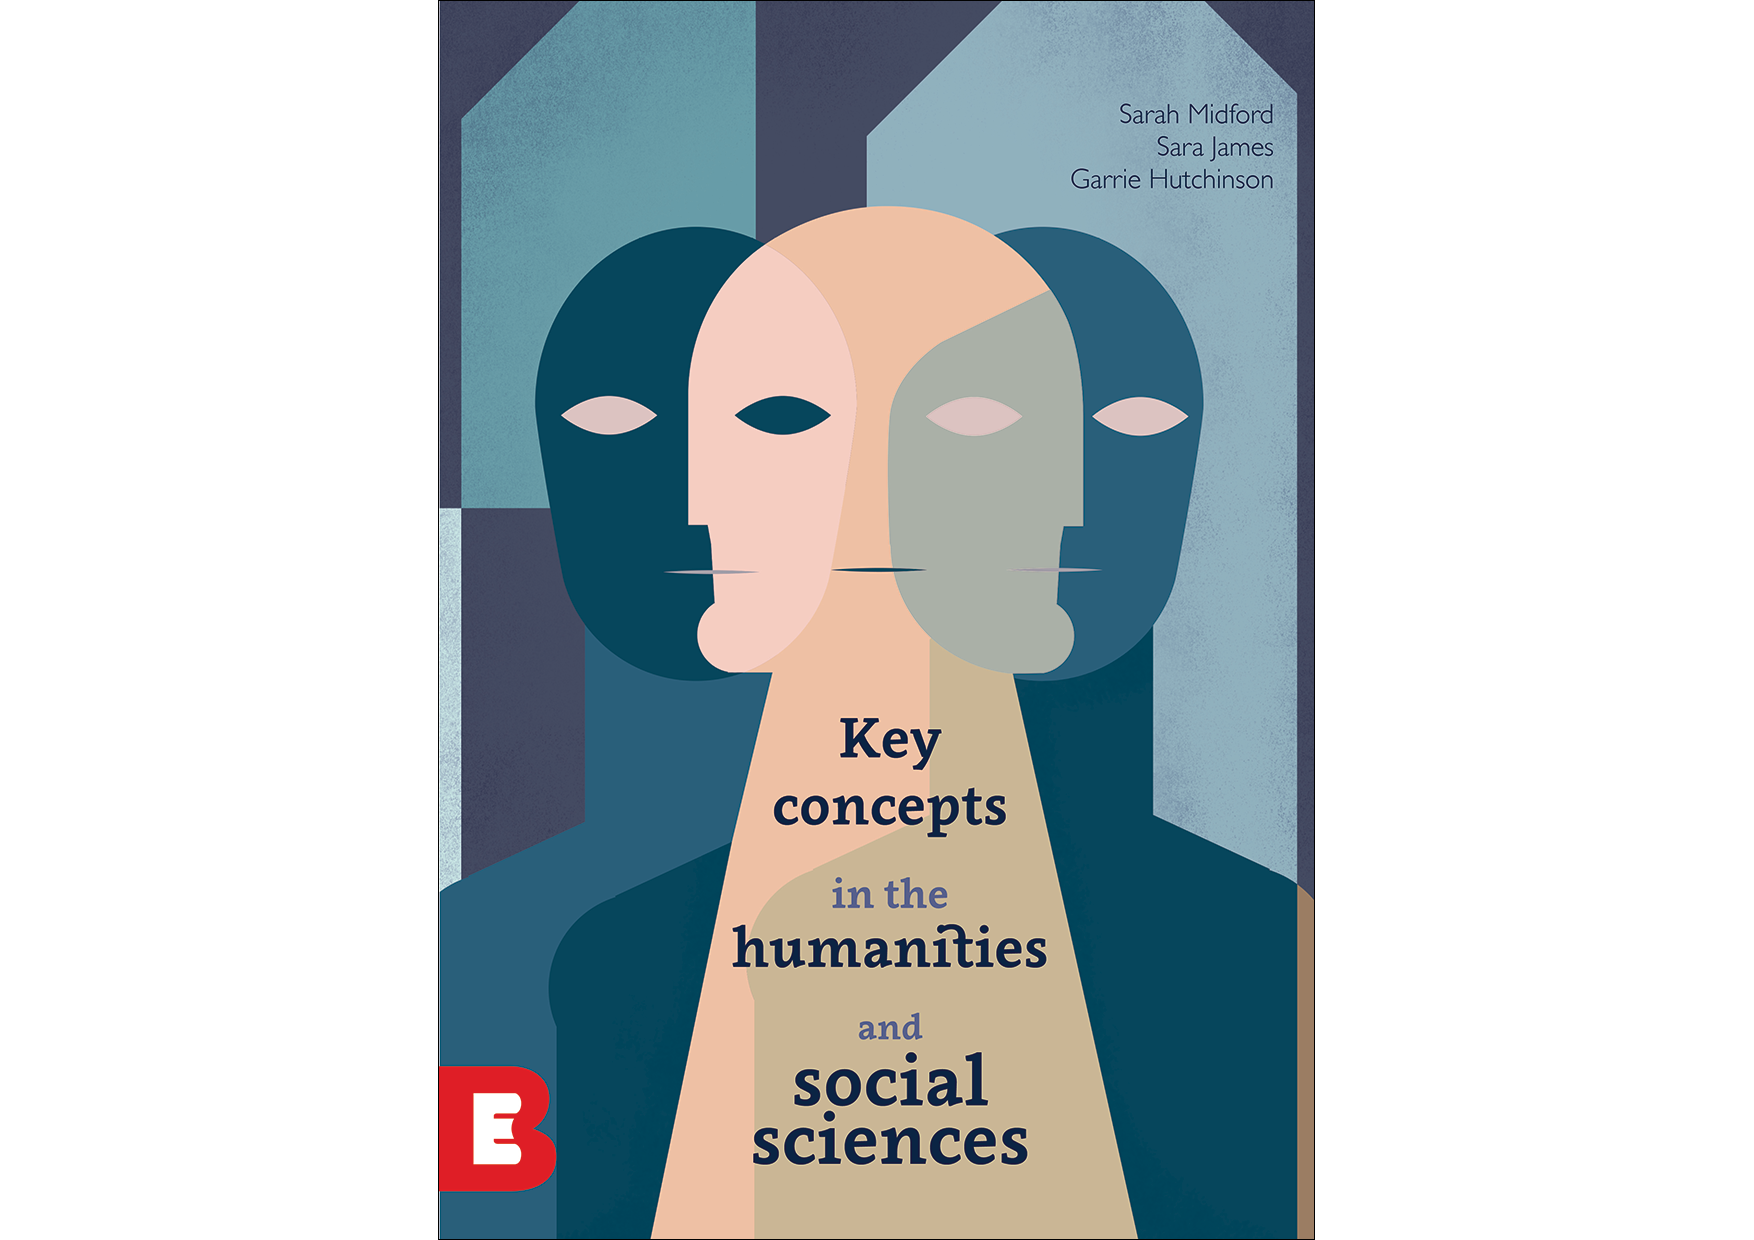 Key concepts in the humanities and social sciences